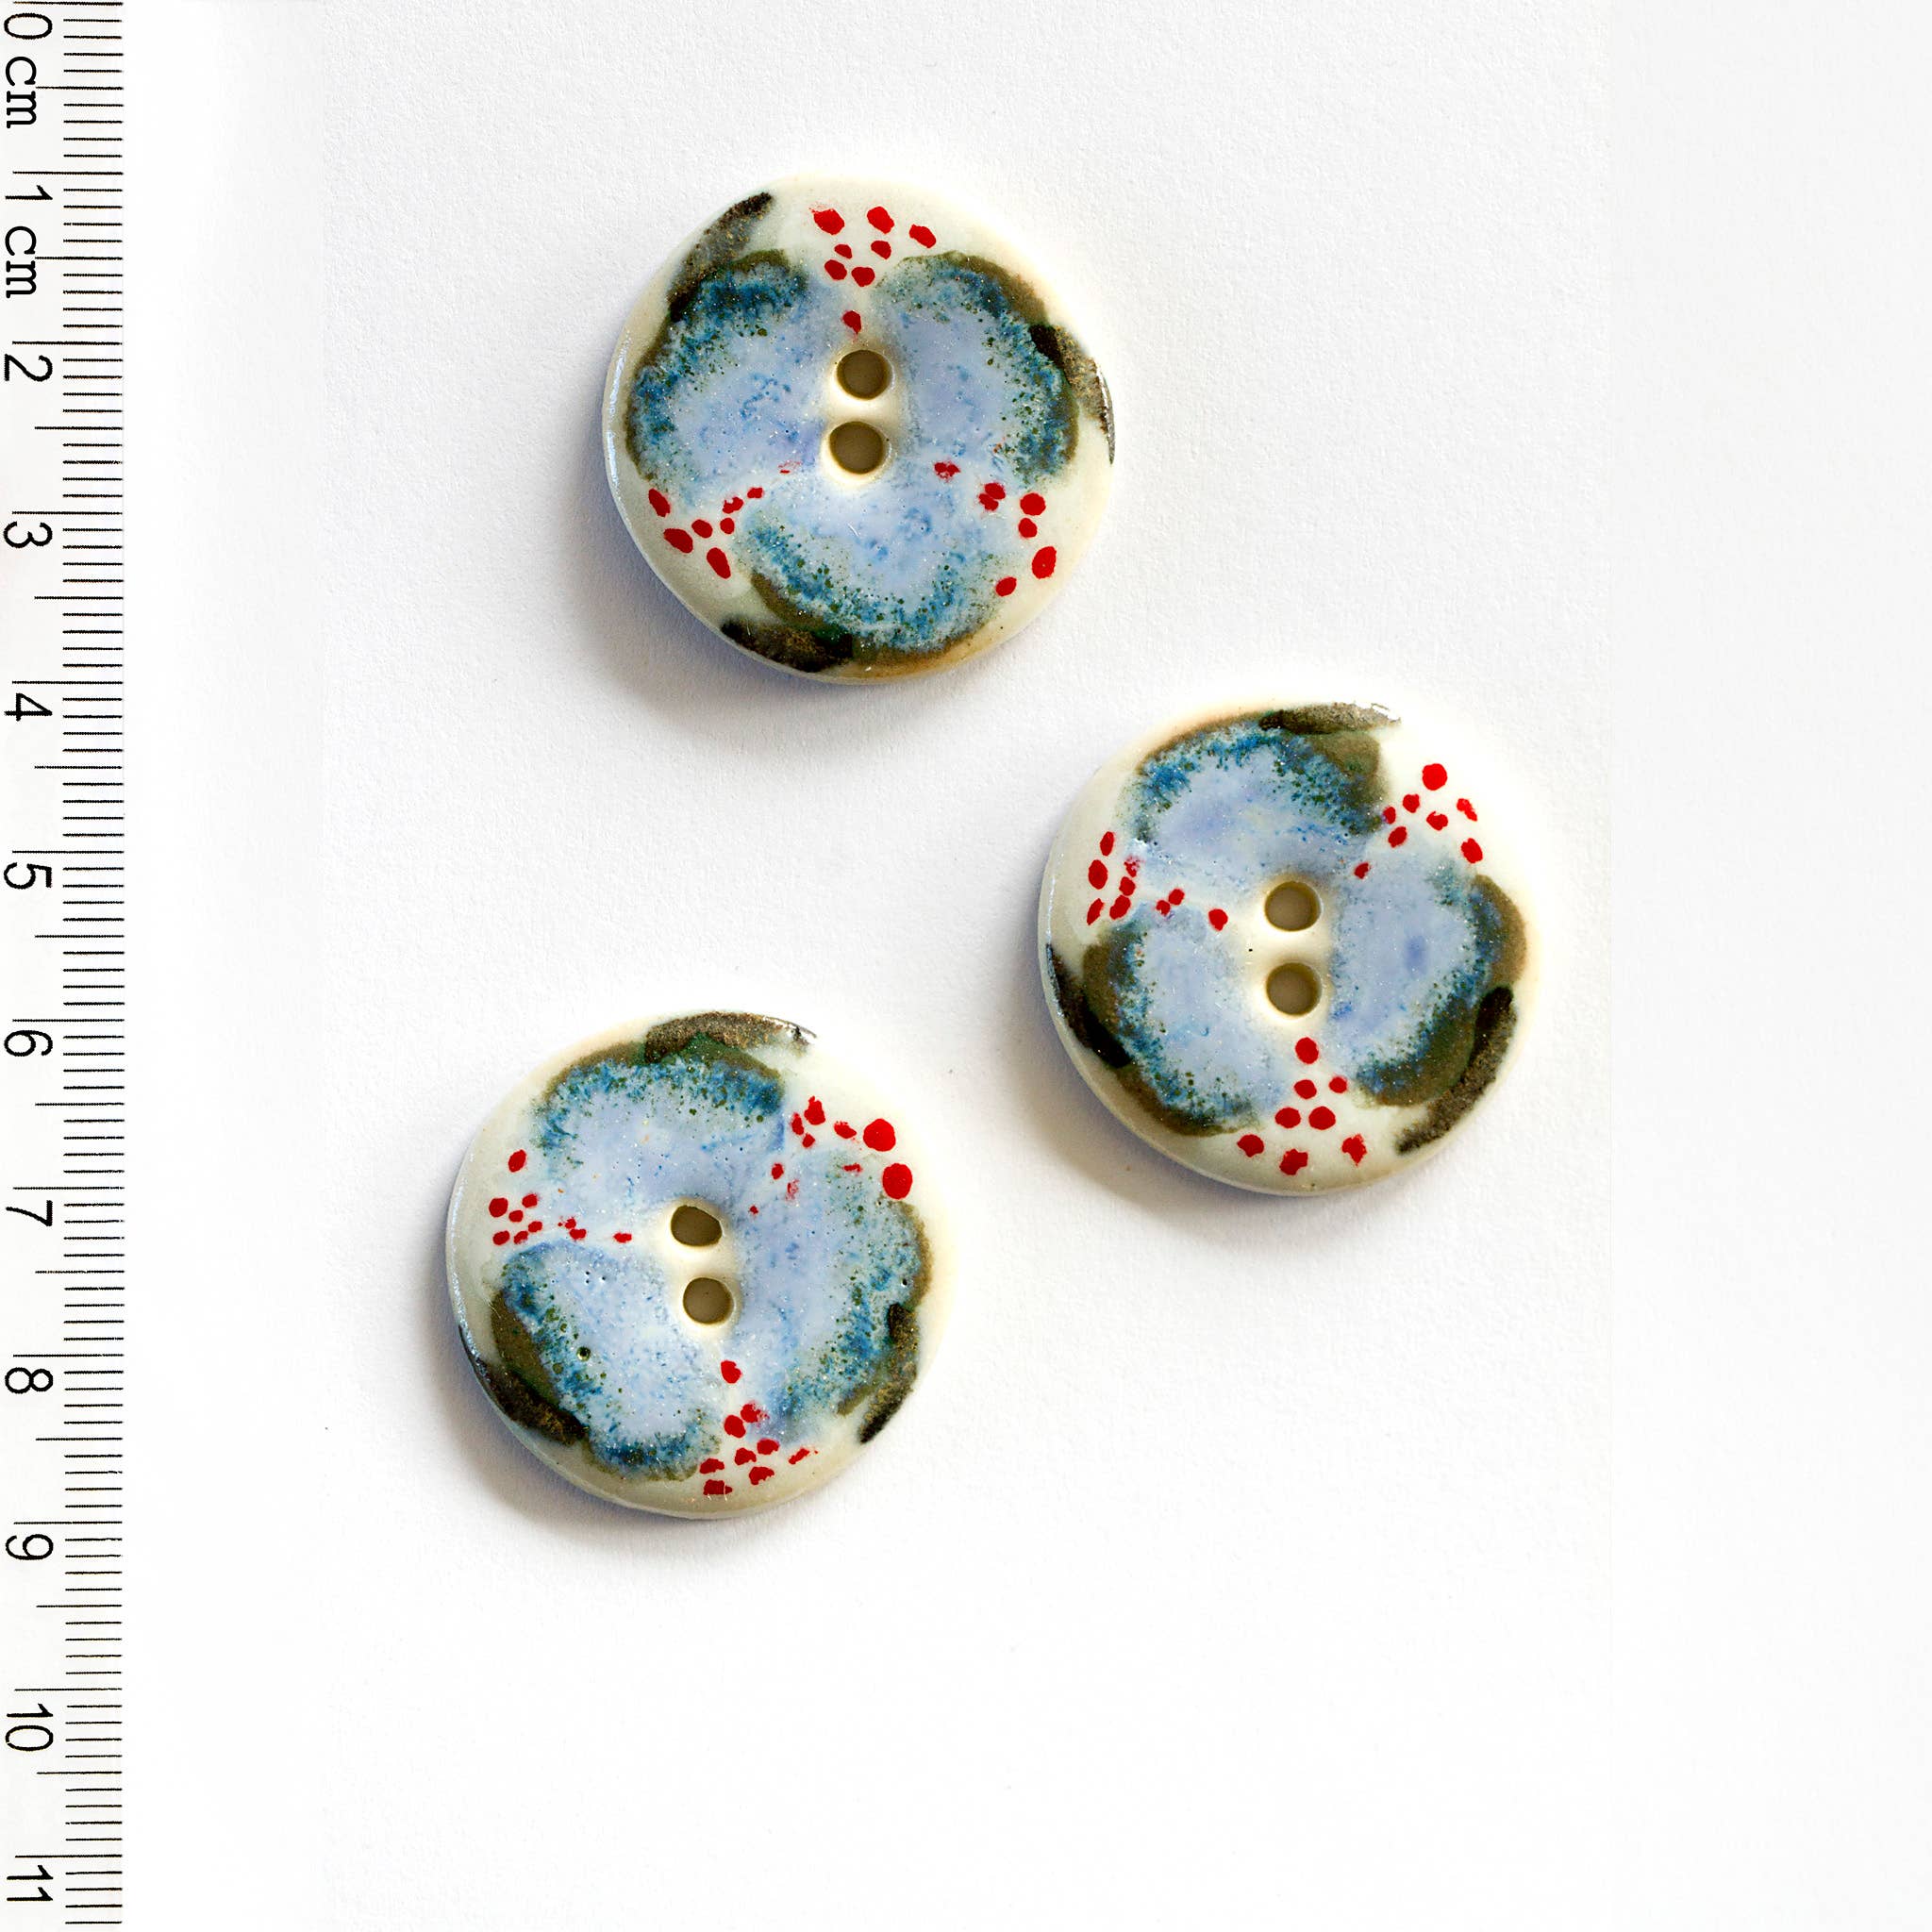 Incomparable Buttons - 3 Large Floral Buttons